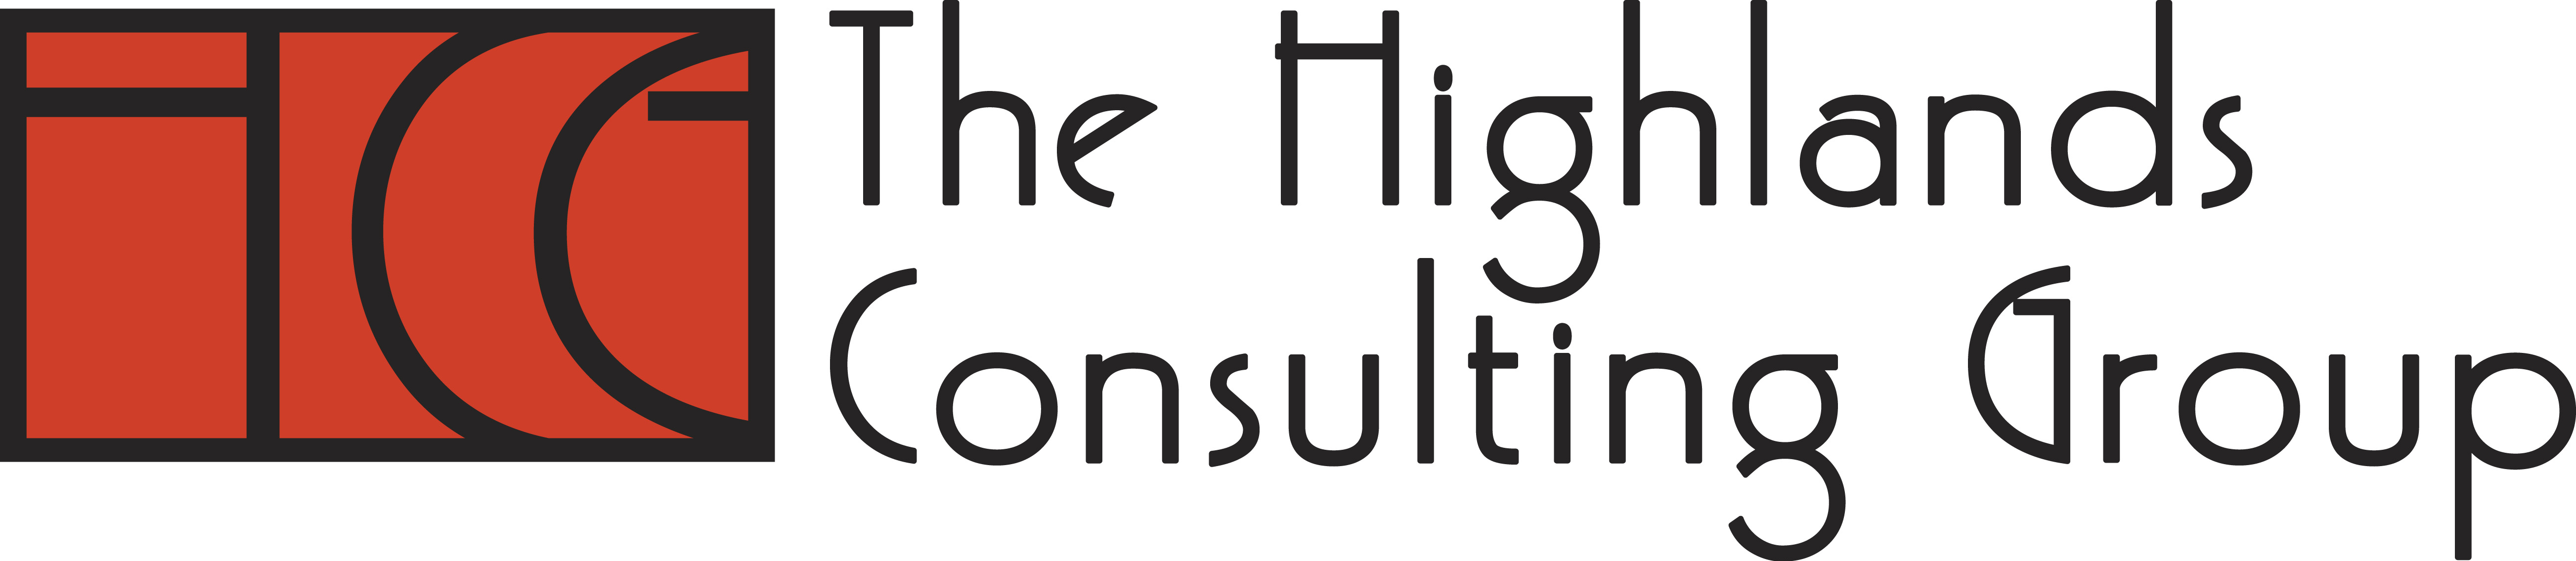 The Highlands Consulting Group